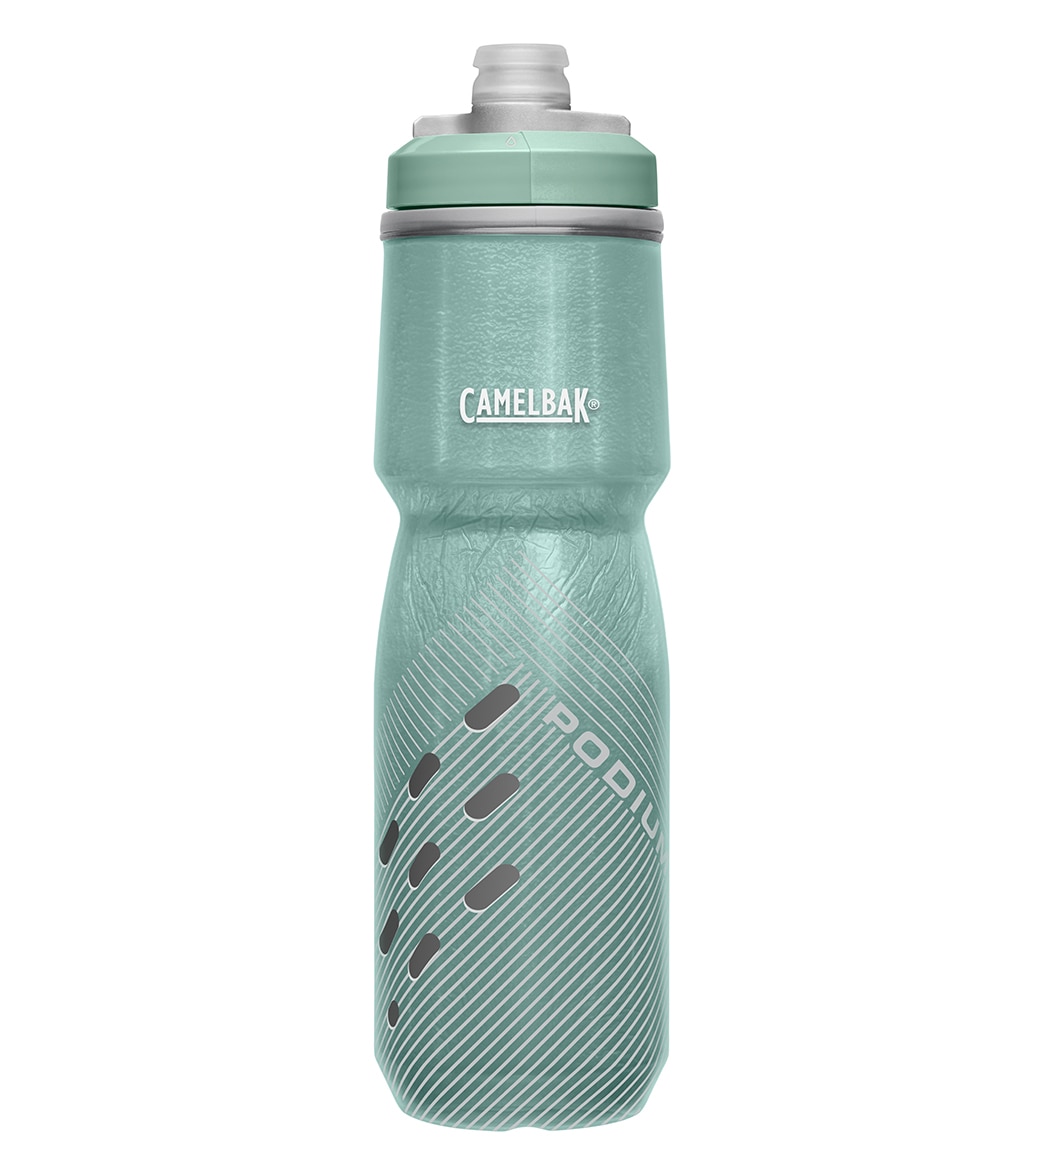 Camelbak Podium Chill 24Oz Water Bottle - Sage Perforated - Swimoutlet.com